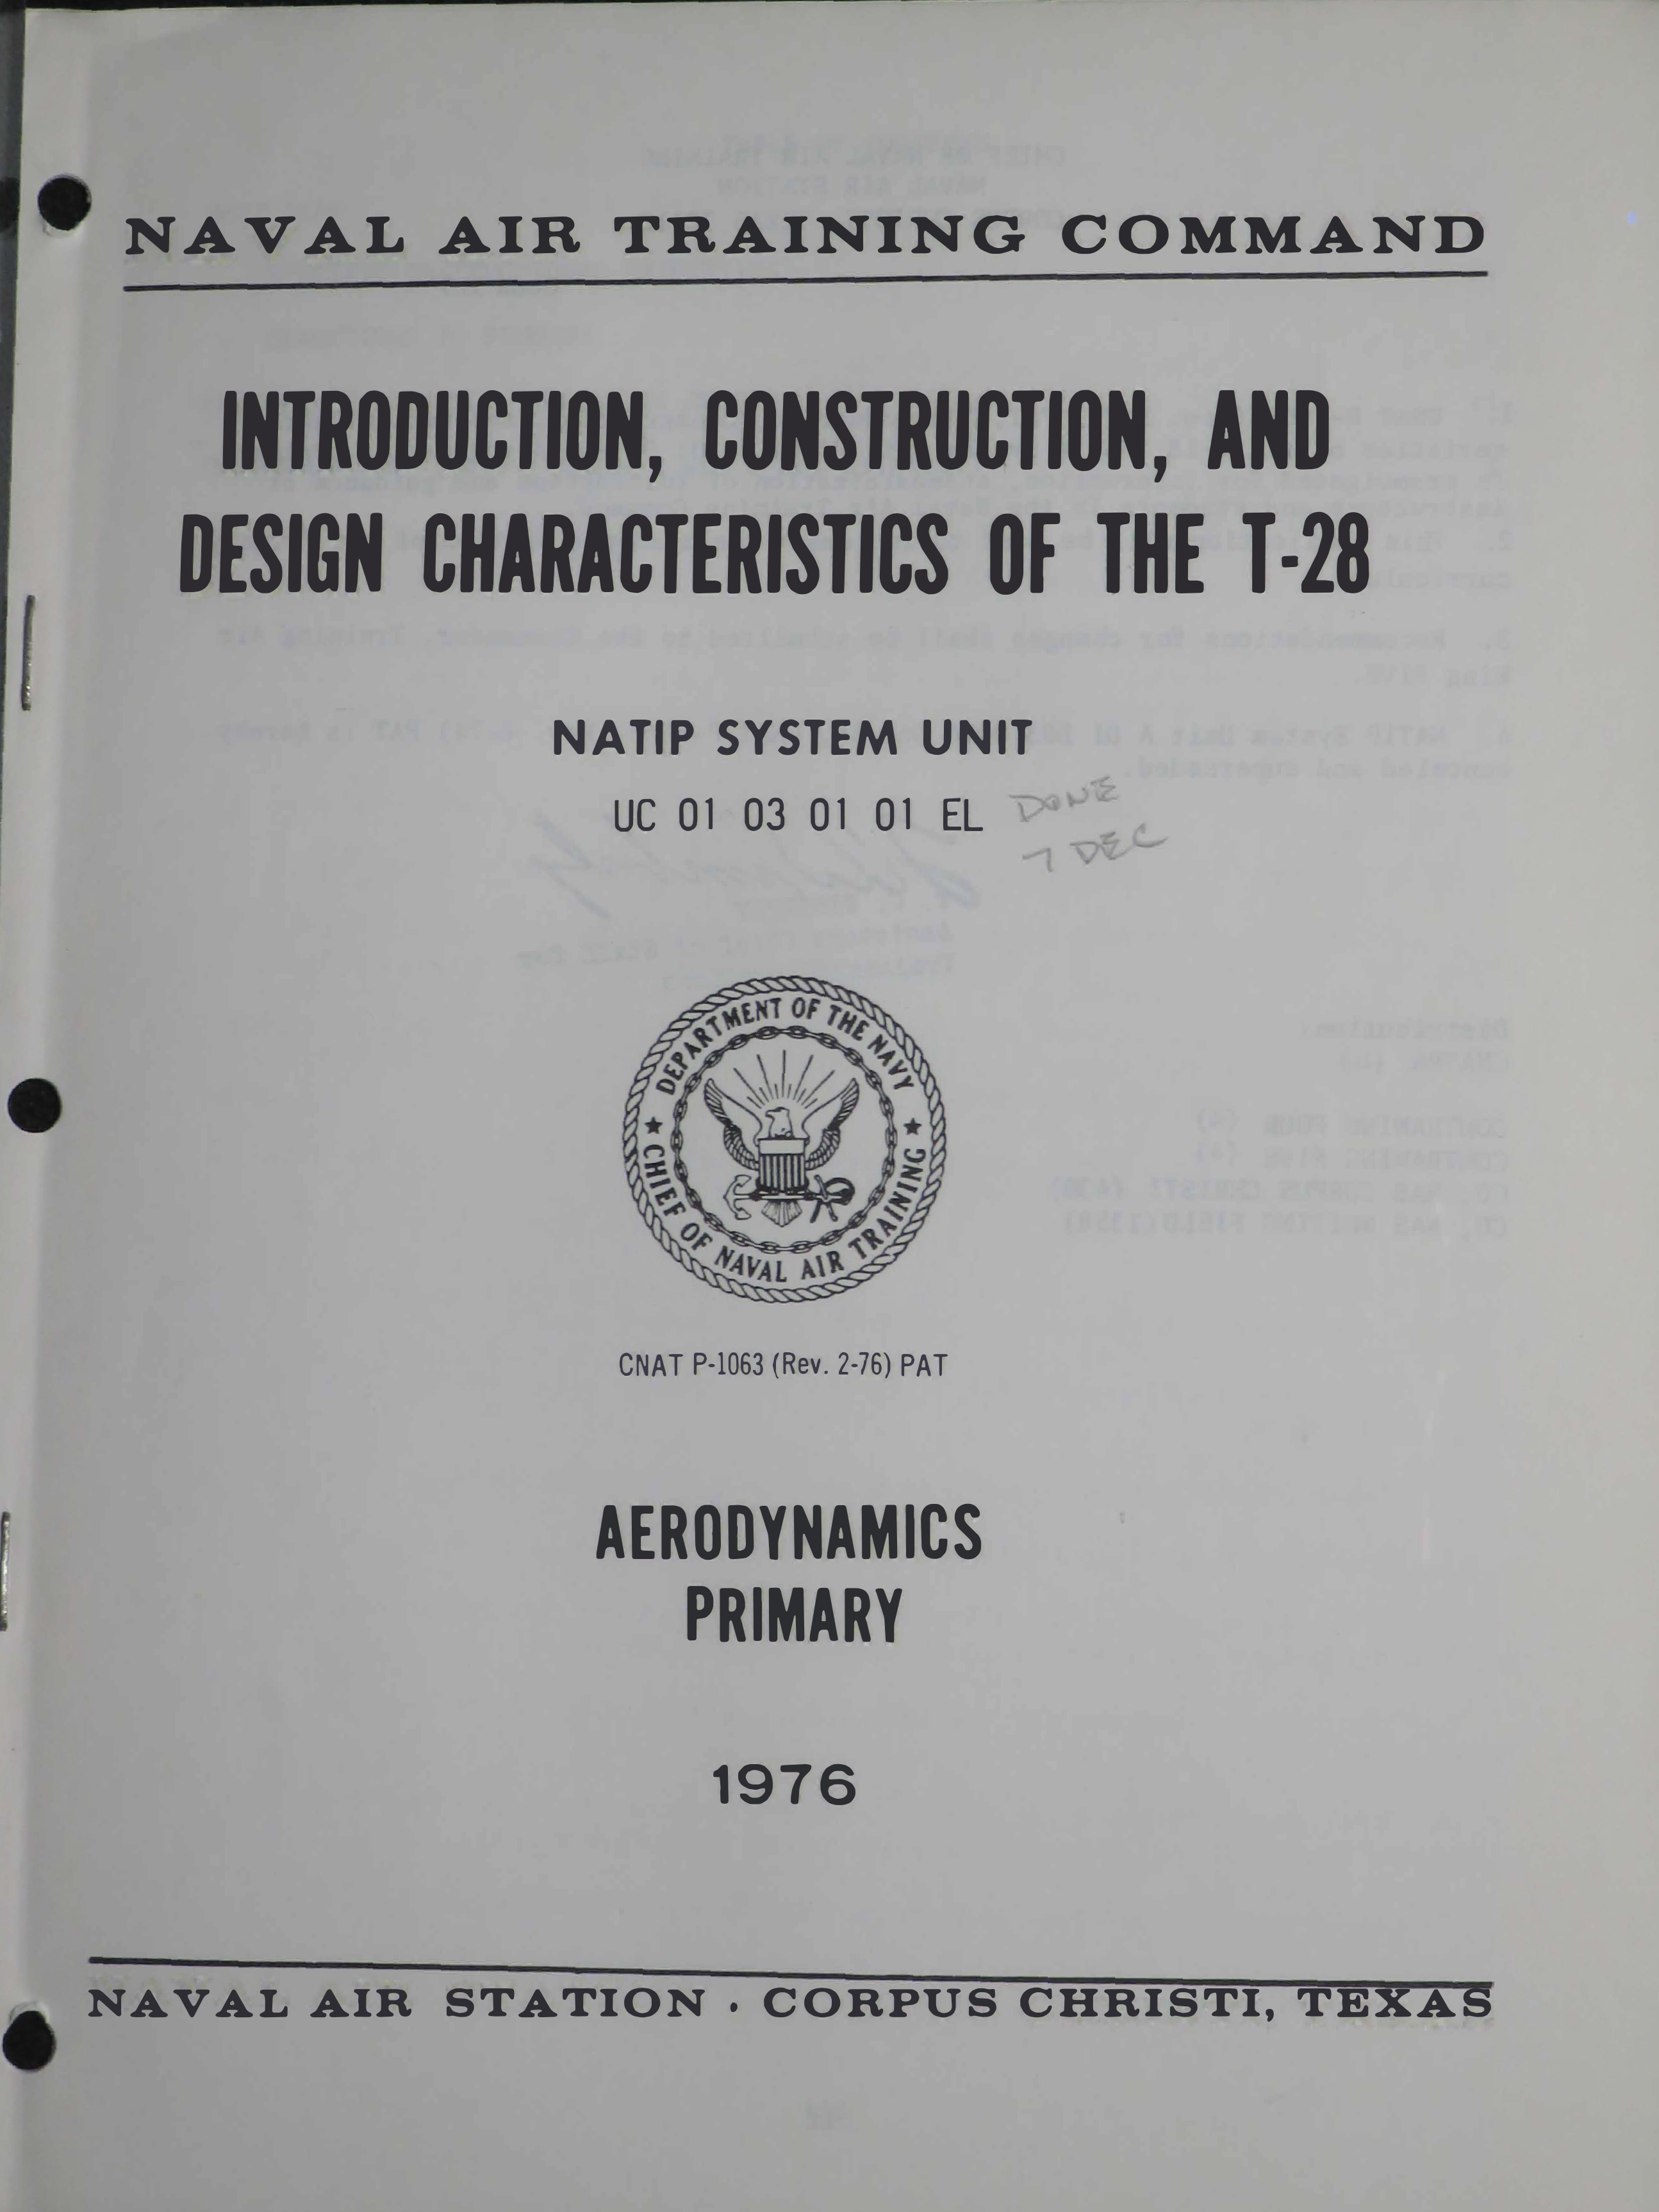 Sample page 1 from AirCorps Library document: Introduction, Construction, and Design Characteristics of the T-28